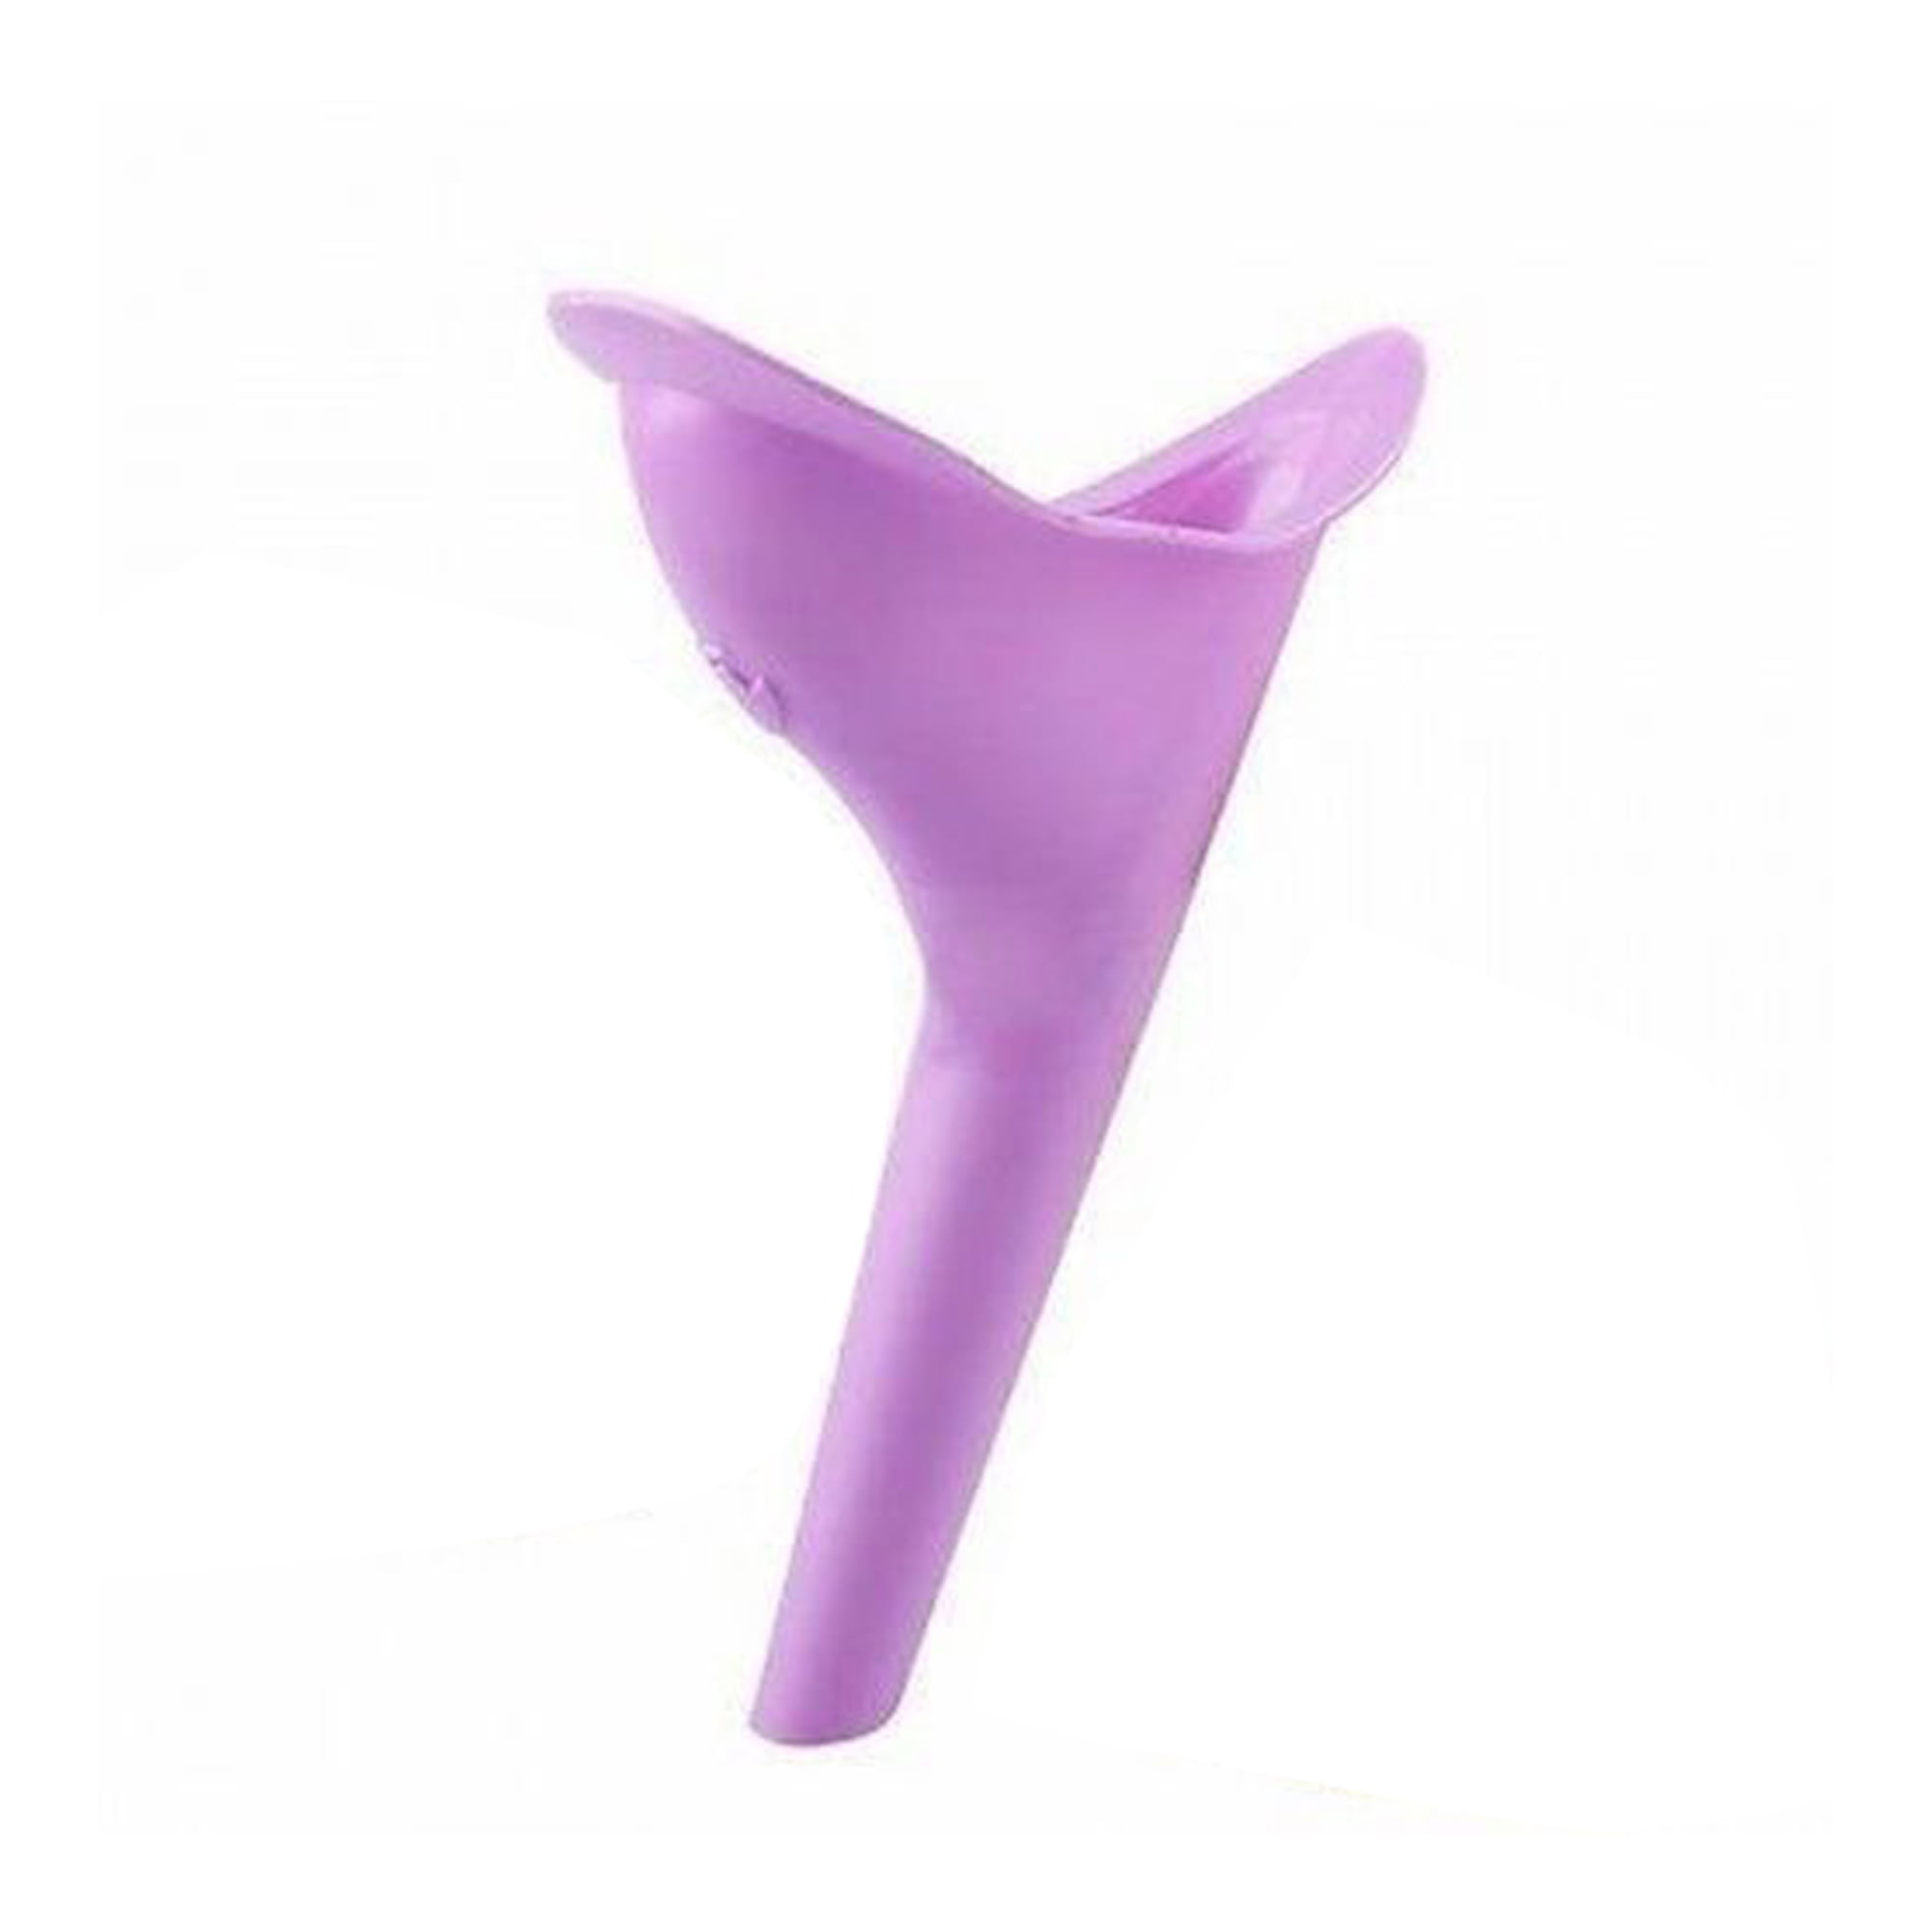 2x Female Urination Device Women Portable Lightweight Silicone Travel Urinal 